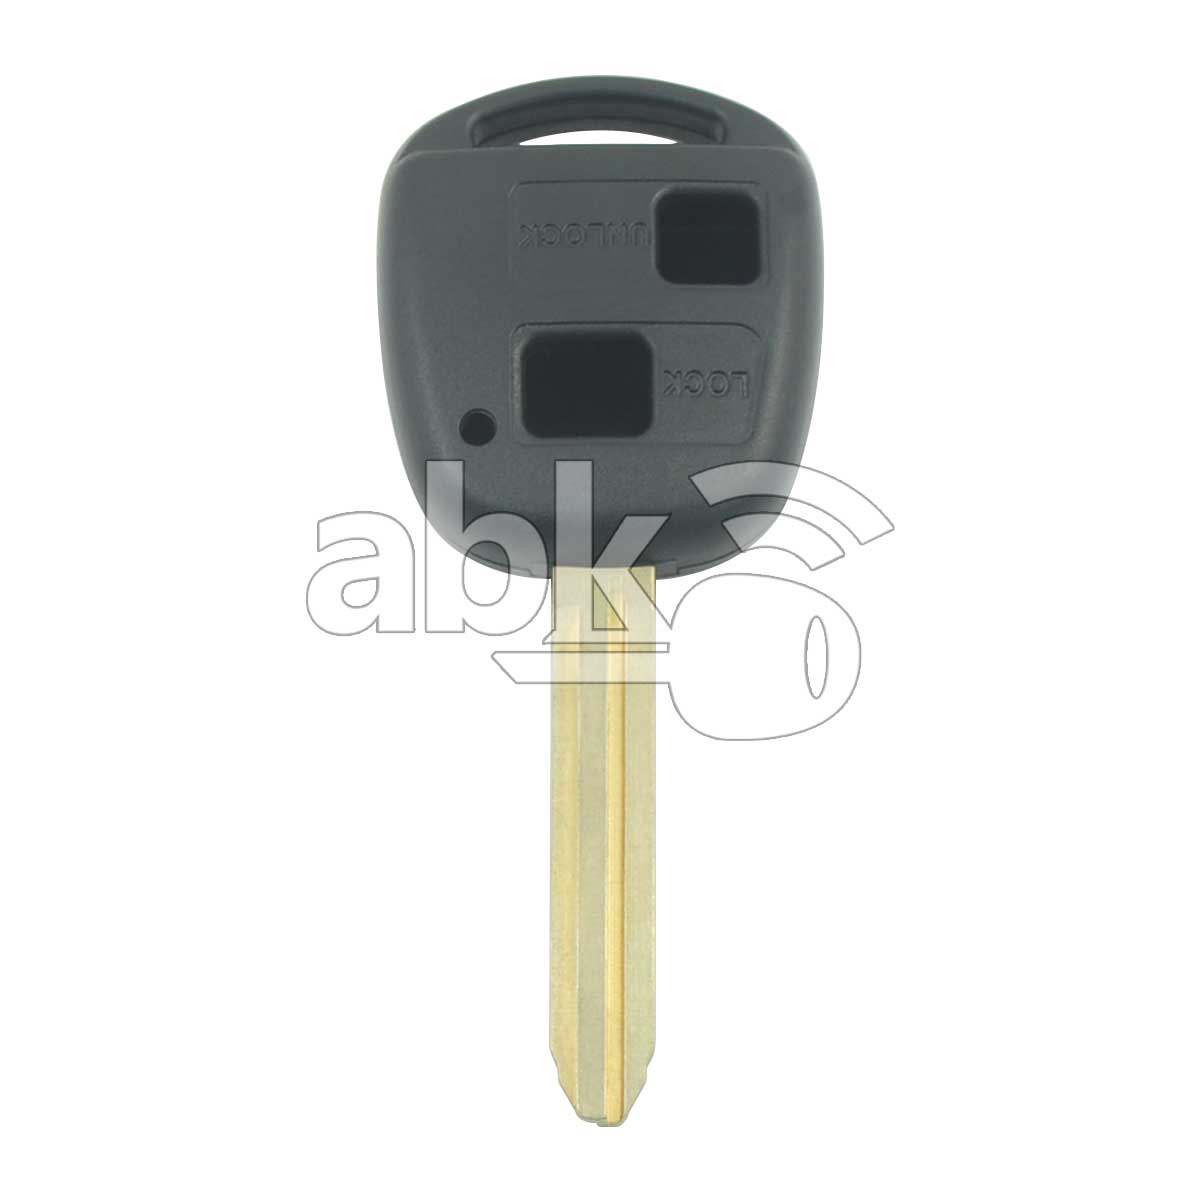 Toyota 1998+ Key Head Remote Cover 2Buttons TOY43 - ABK-2591 - ABKEYS.COM